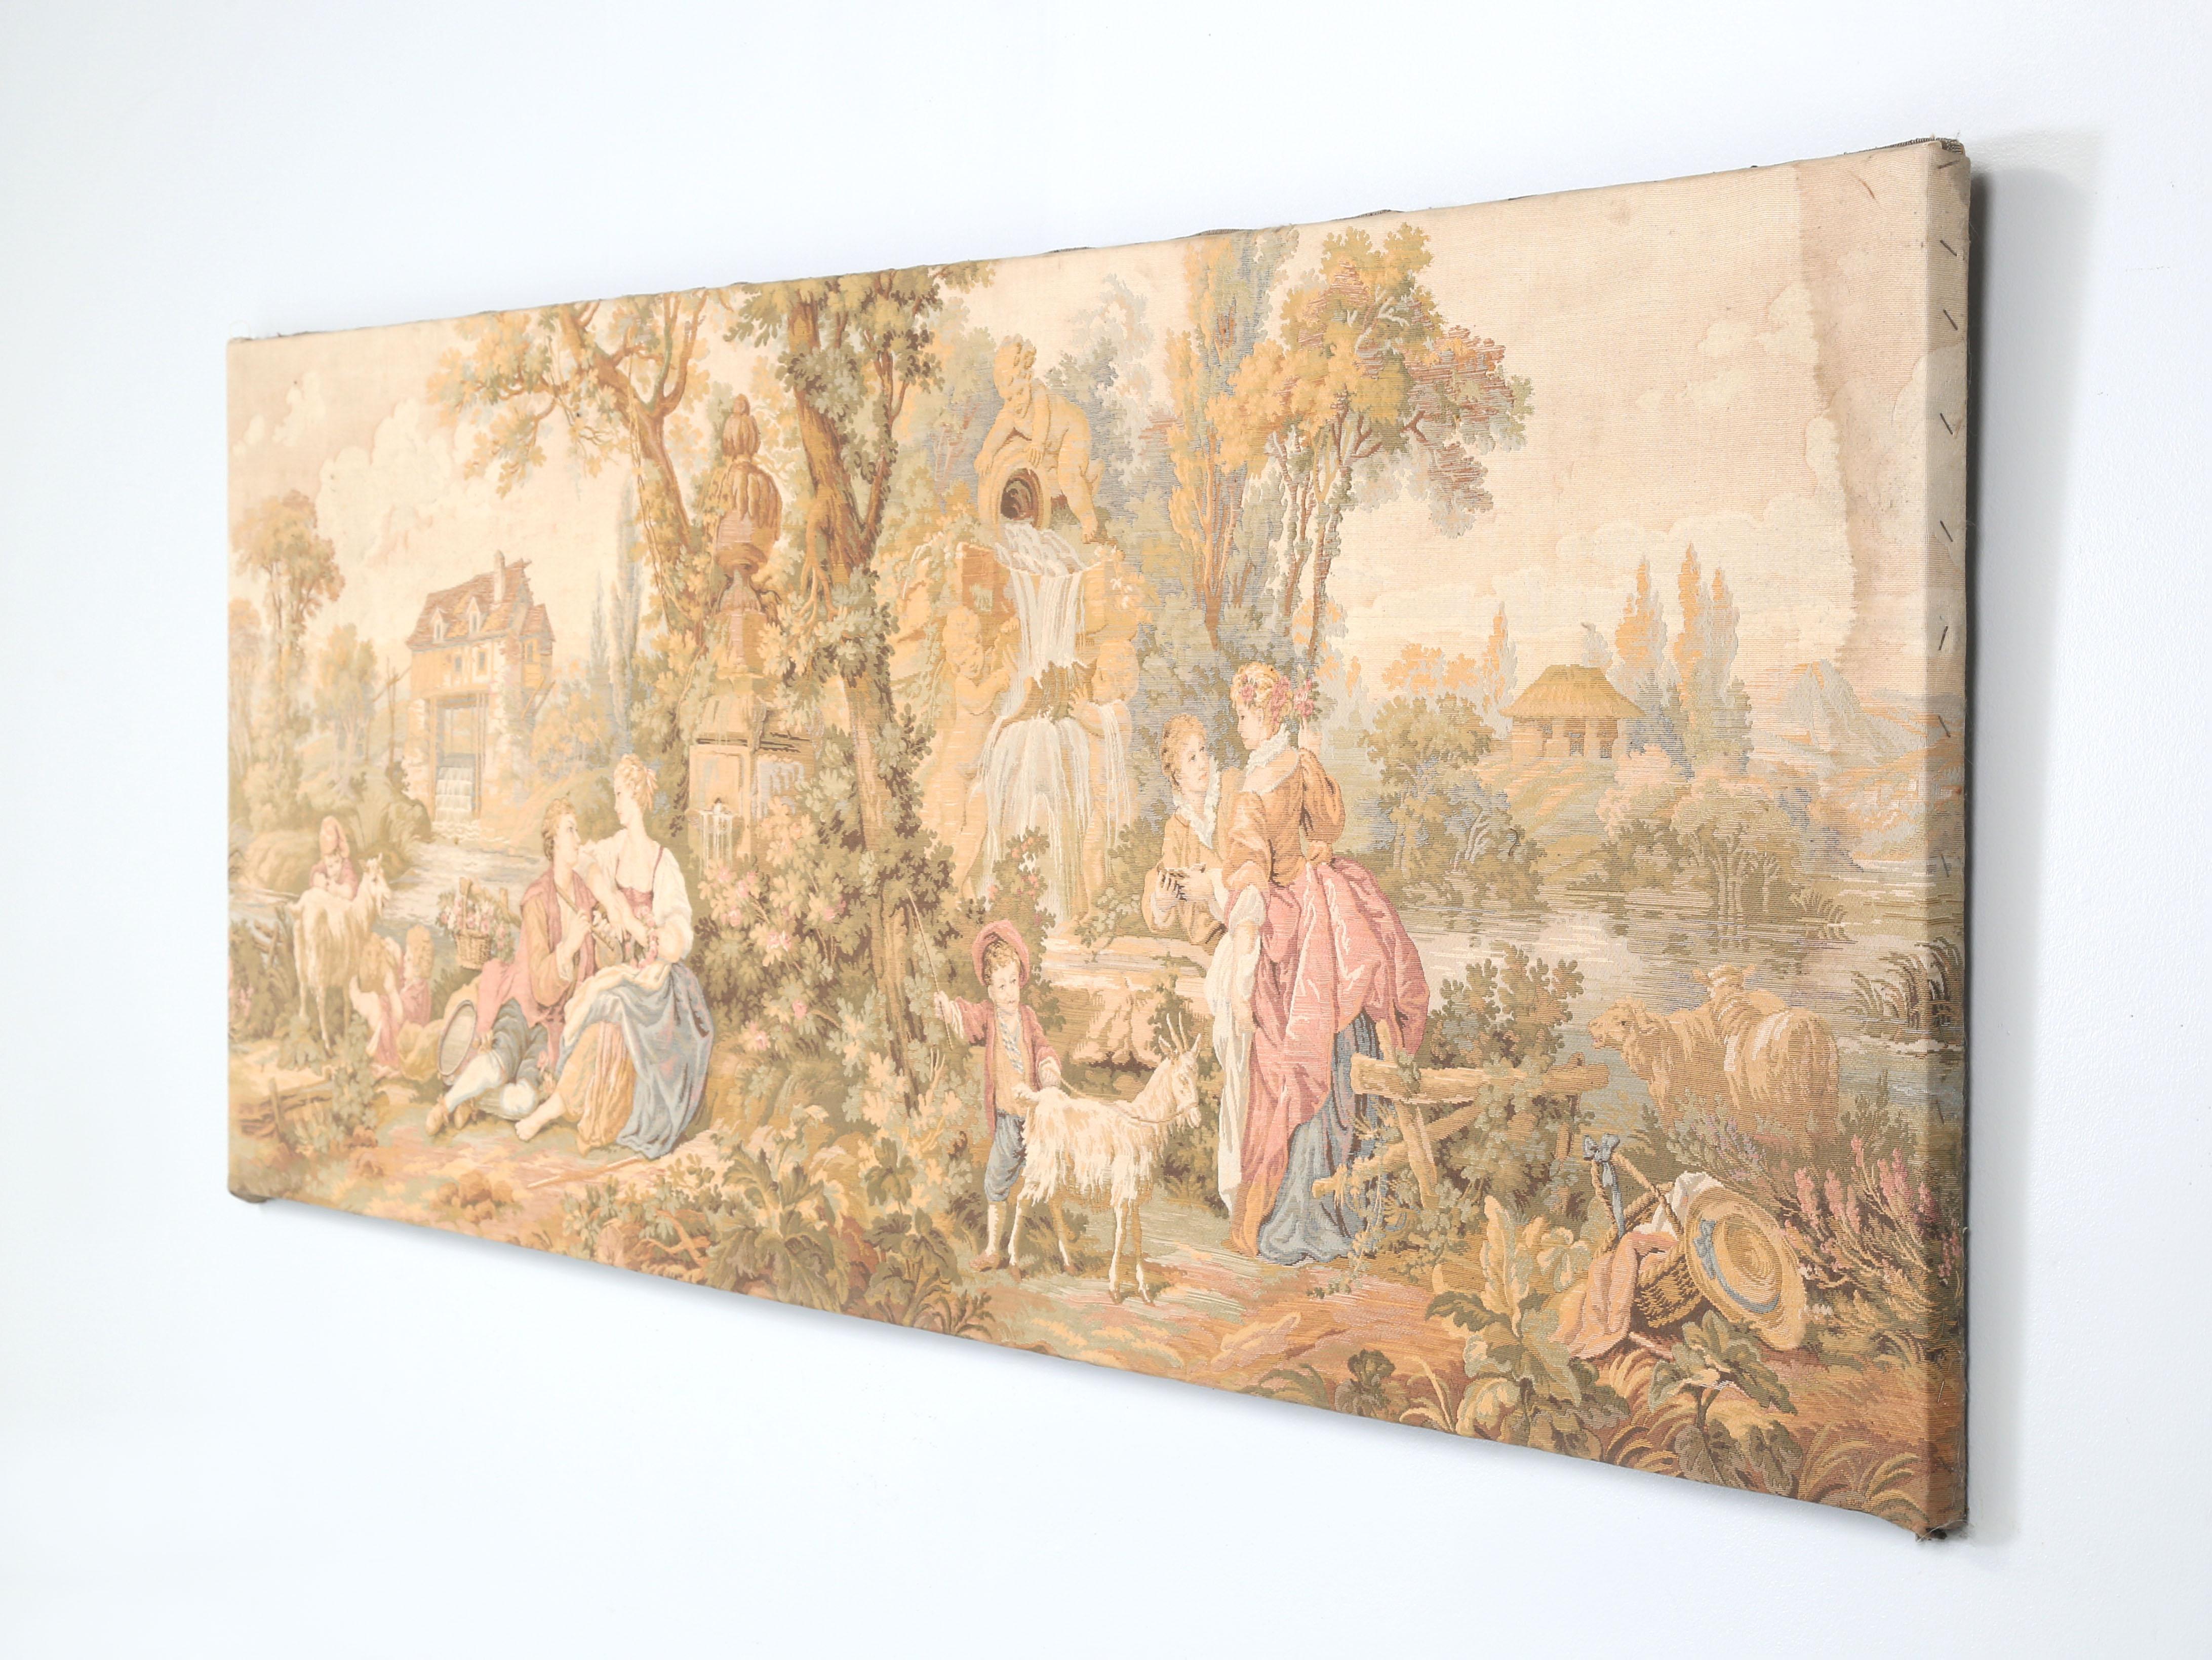 Antique French Scenic and Tranquil Wall Tapestry probably made in the early 1900's. There are no signs of prior repairs, although there is the normal sun-fade one typically sees in older French wall tapestry's. There is a minor stain along the right